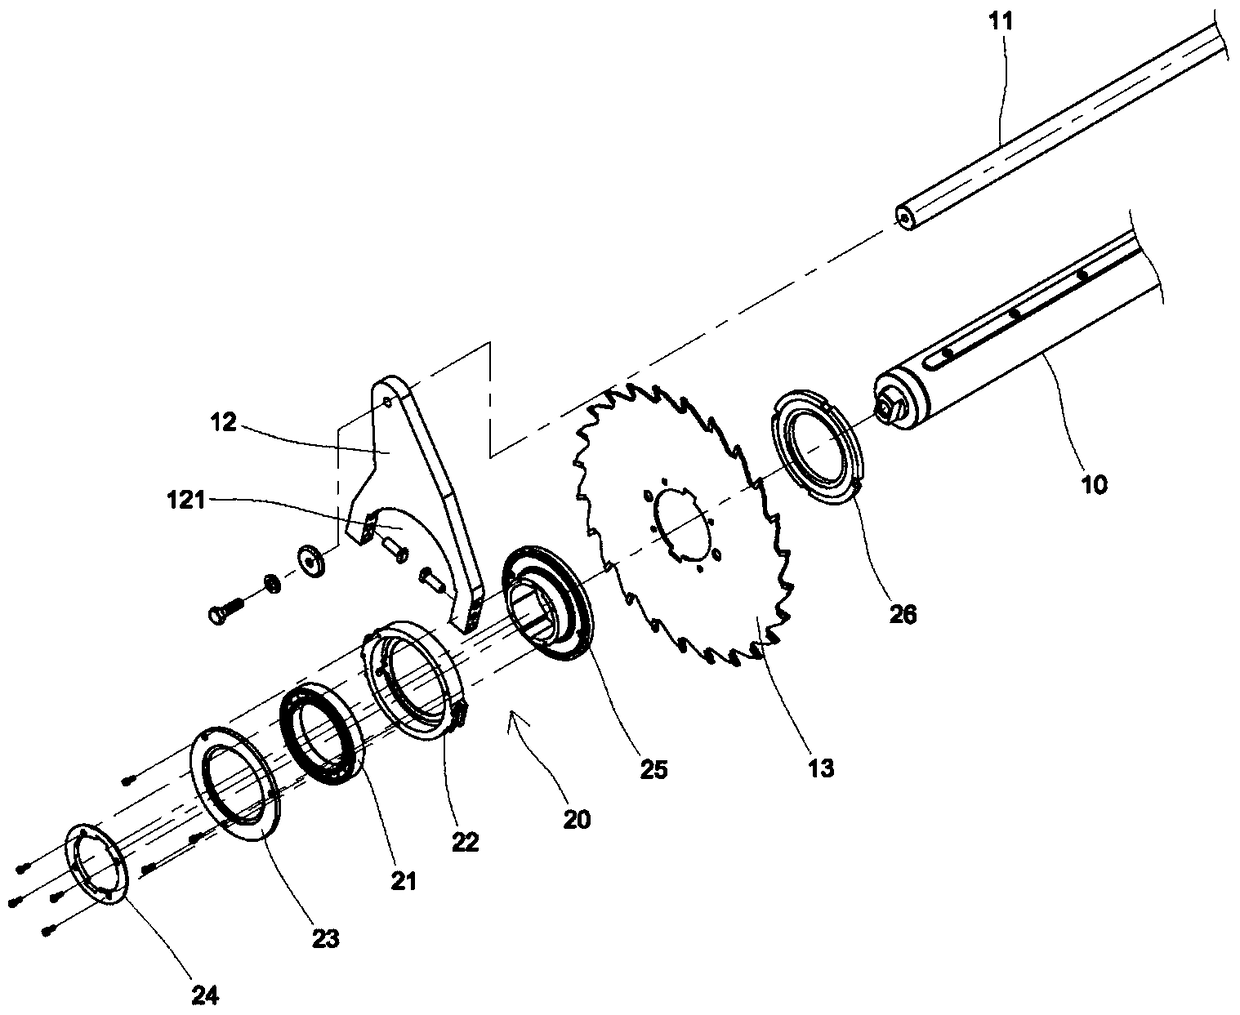 Rolling mechanism of drive shaft of woodworking machine